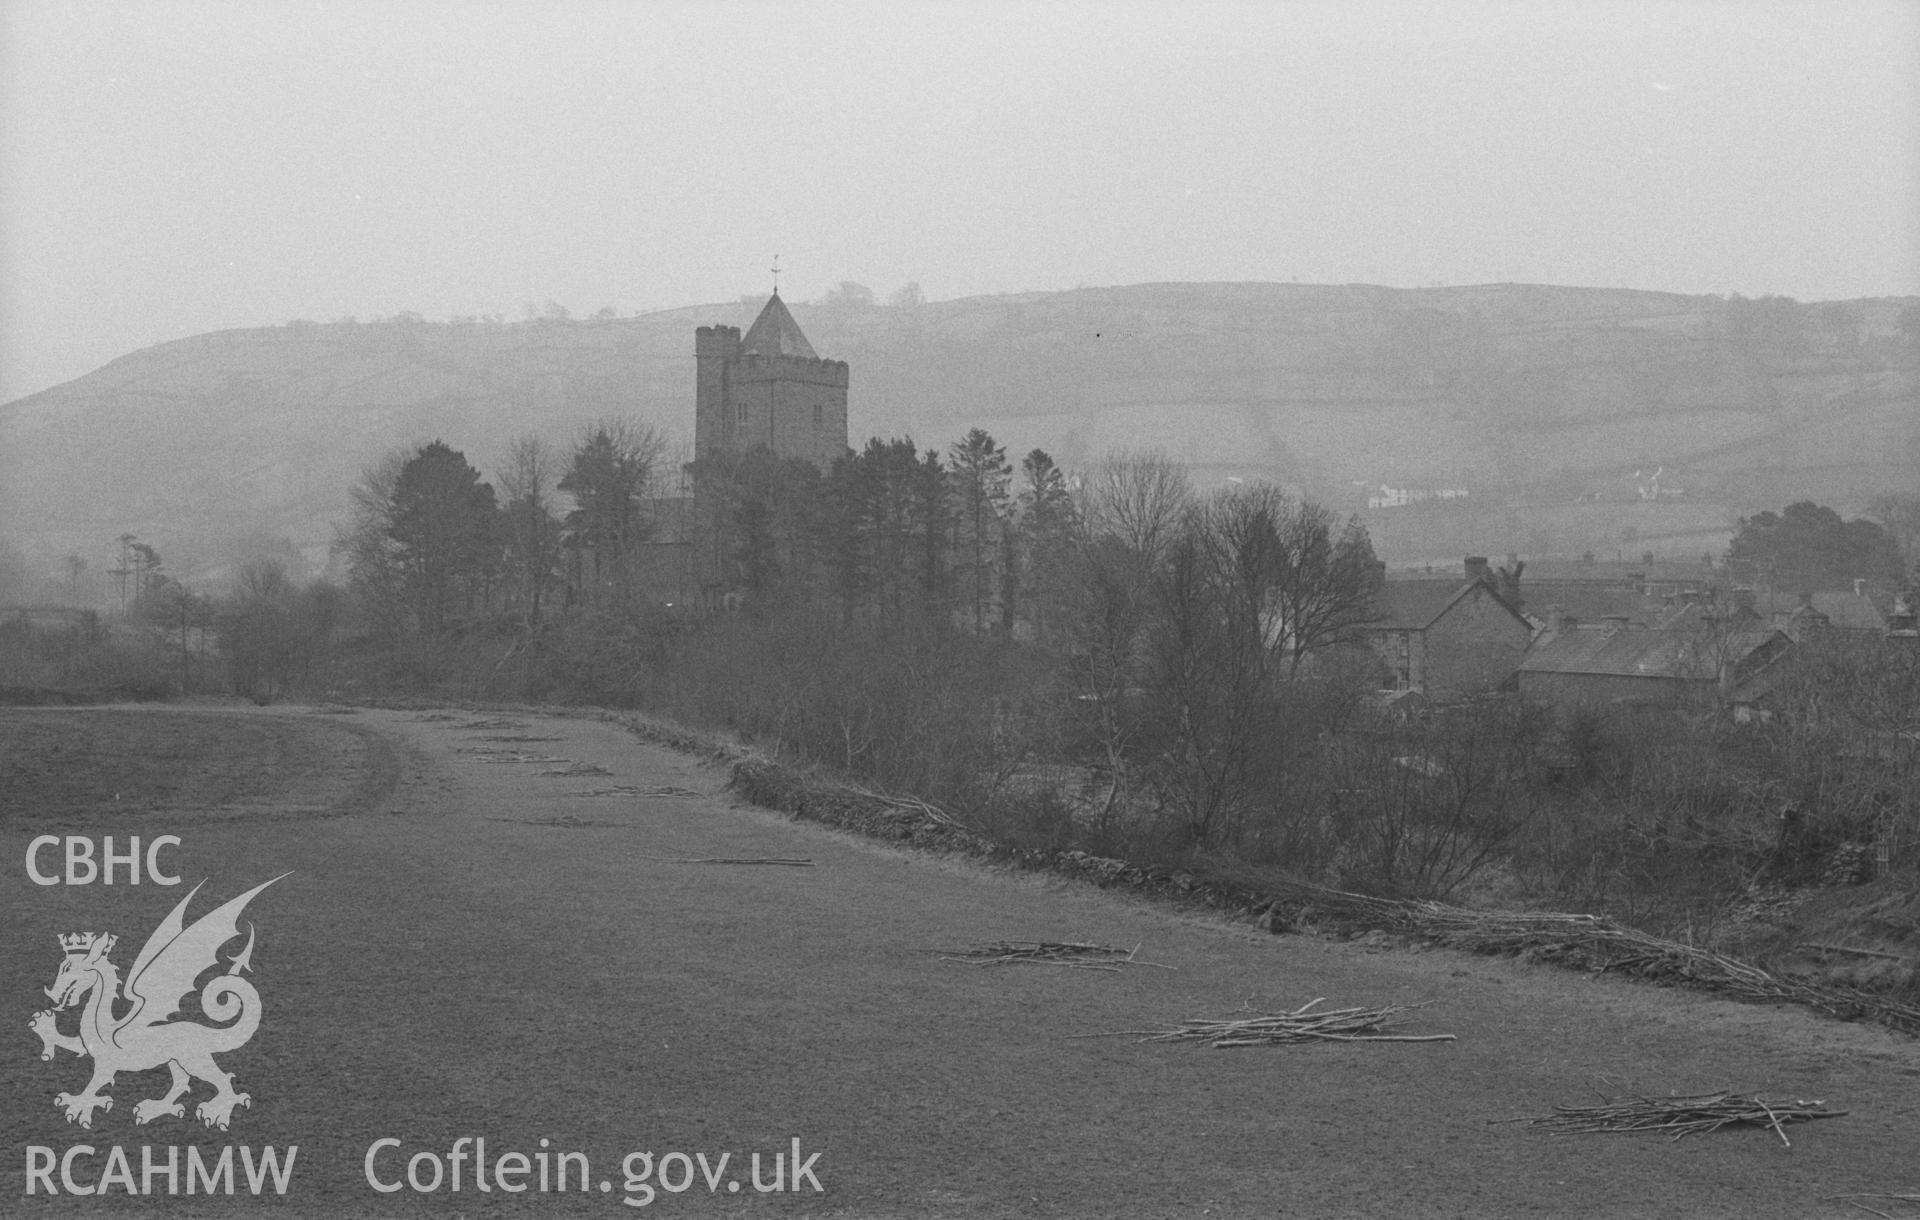 Digital copy of a black and white negative showing a prominent St David's Church in the village of Llanddewi Brefi. Photographed in April 1963 by Arthur O. Chater from across the Afon Brefi at Grid Reference SN 663 555, looking south south east.